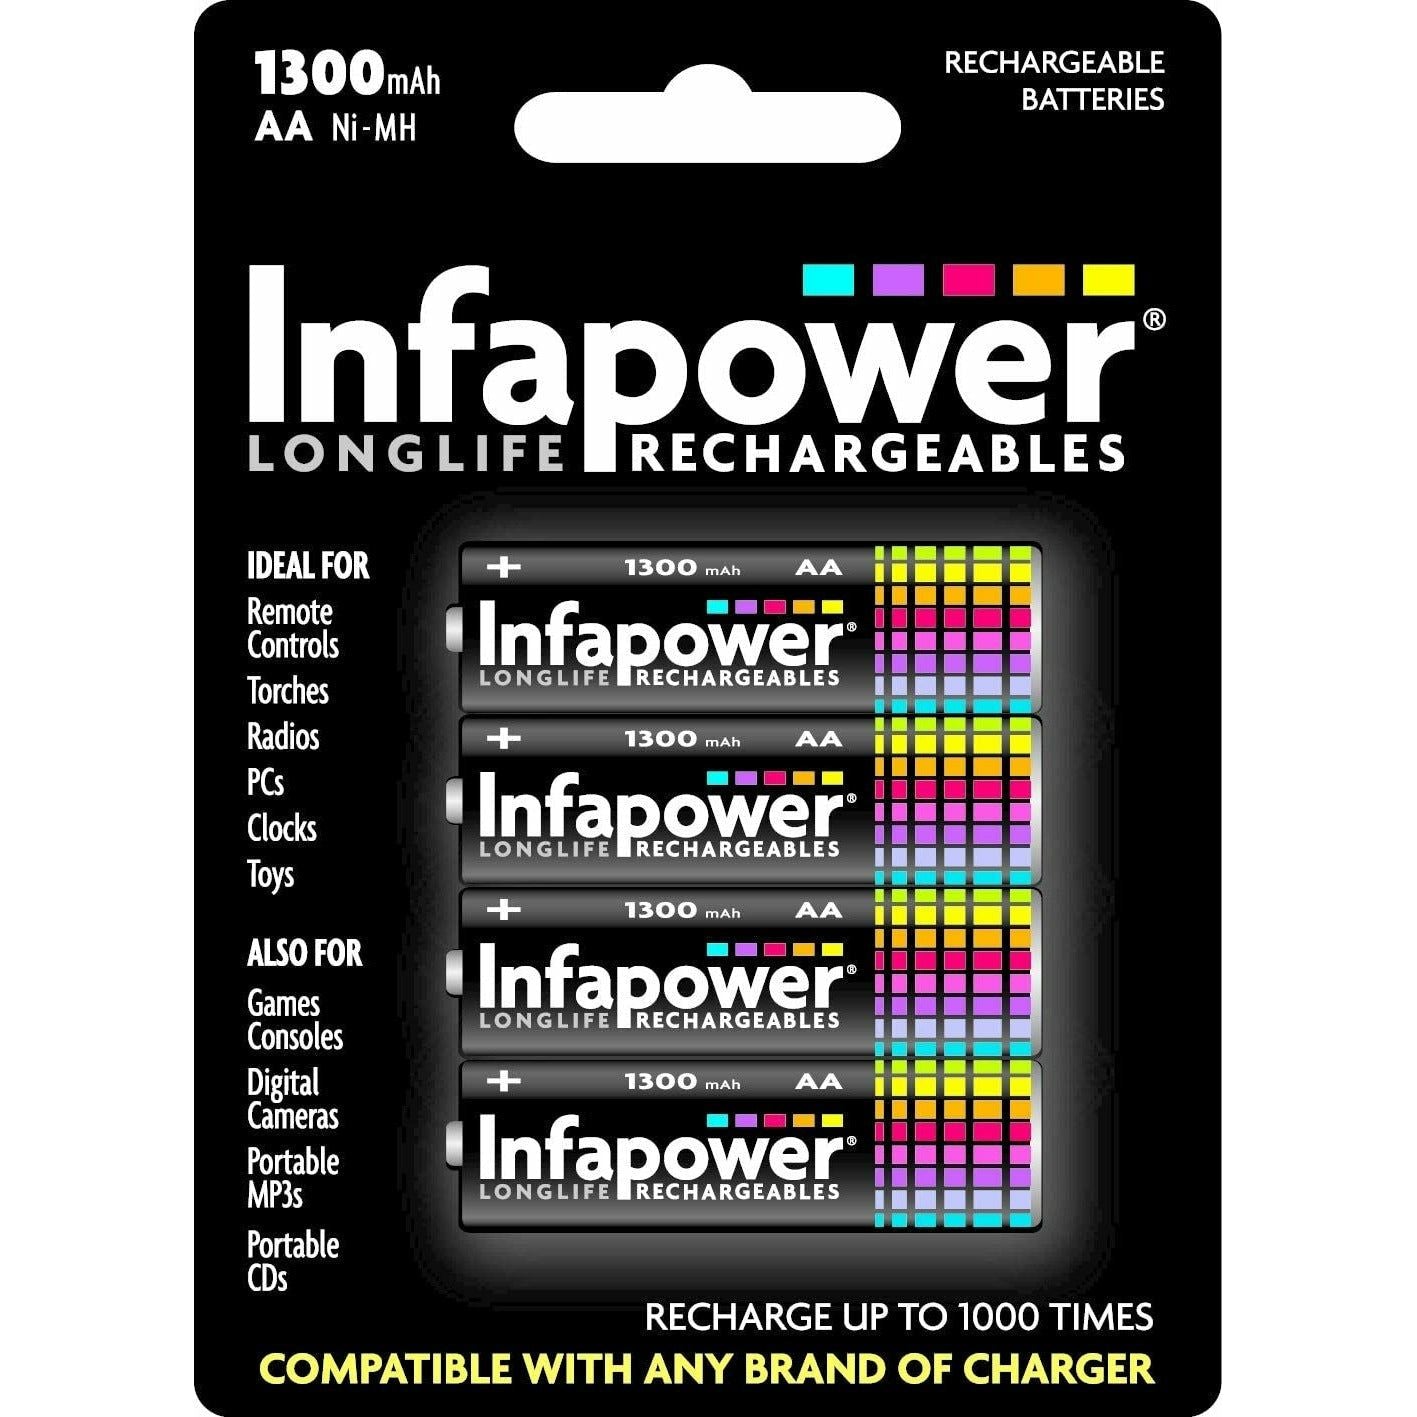 Infapower 1300mAh AA Rechargeable Batteries - Pack of 4 | 210022 (7576409997500)